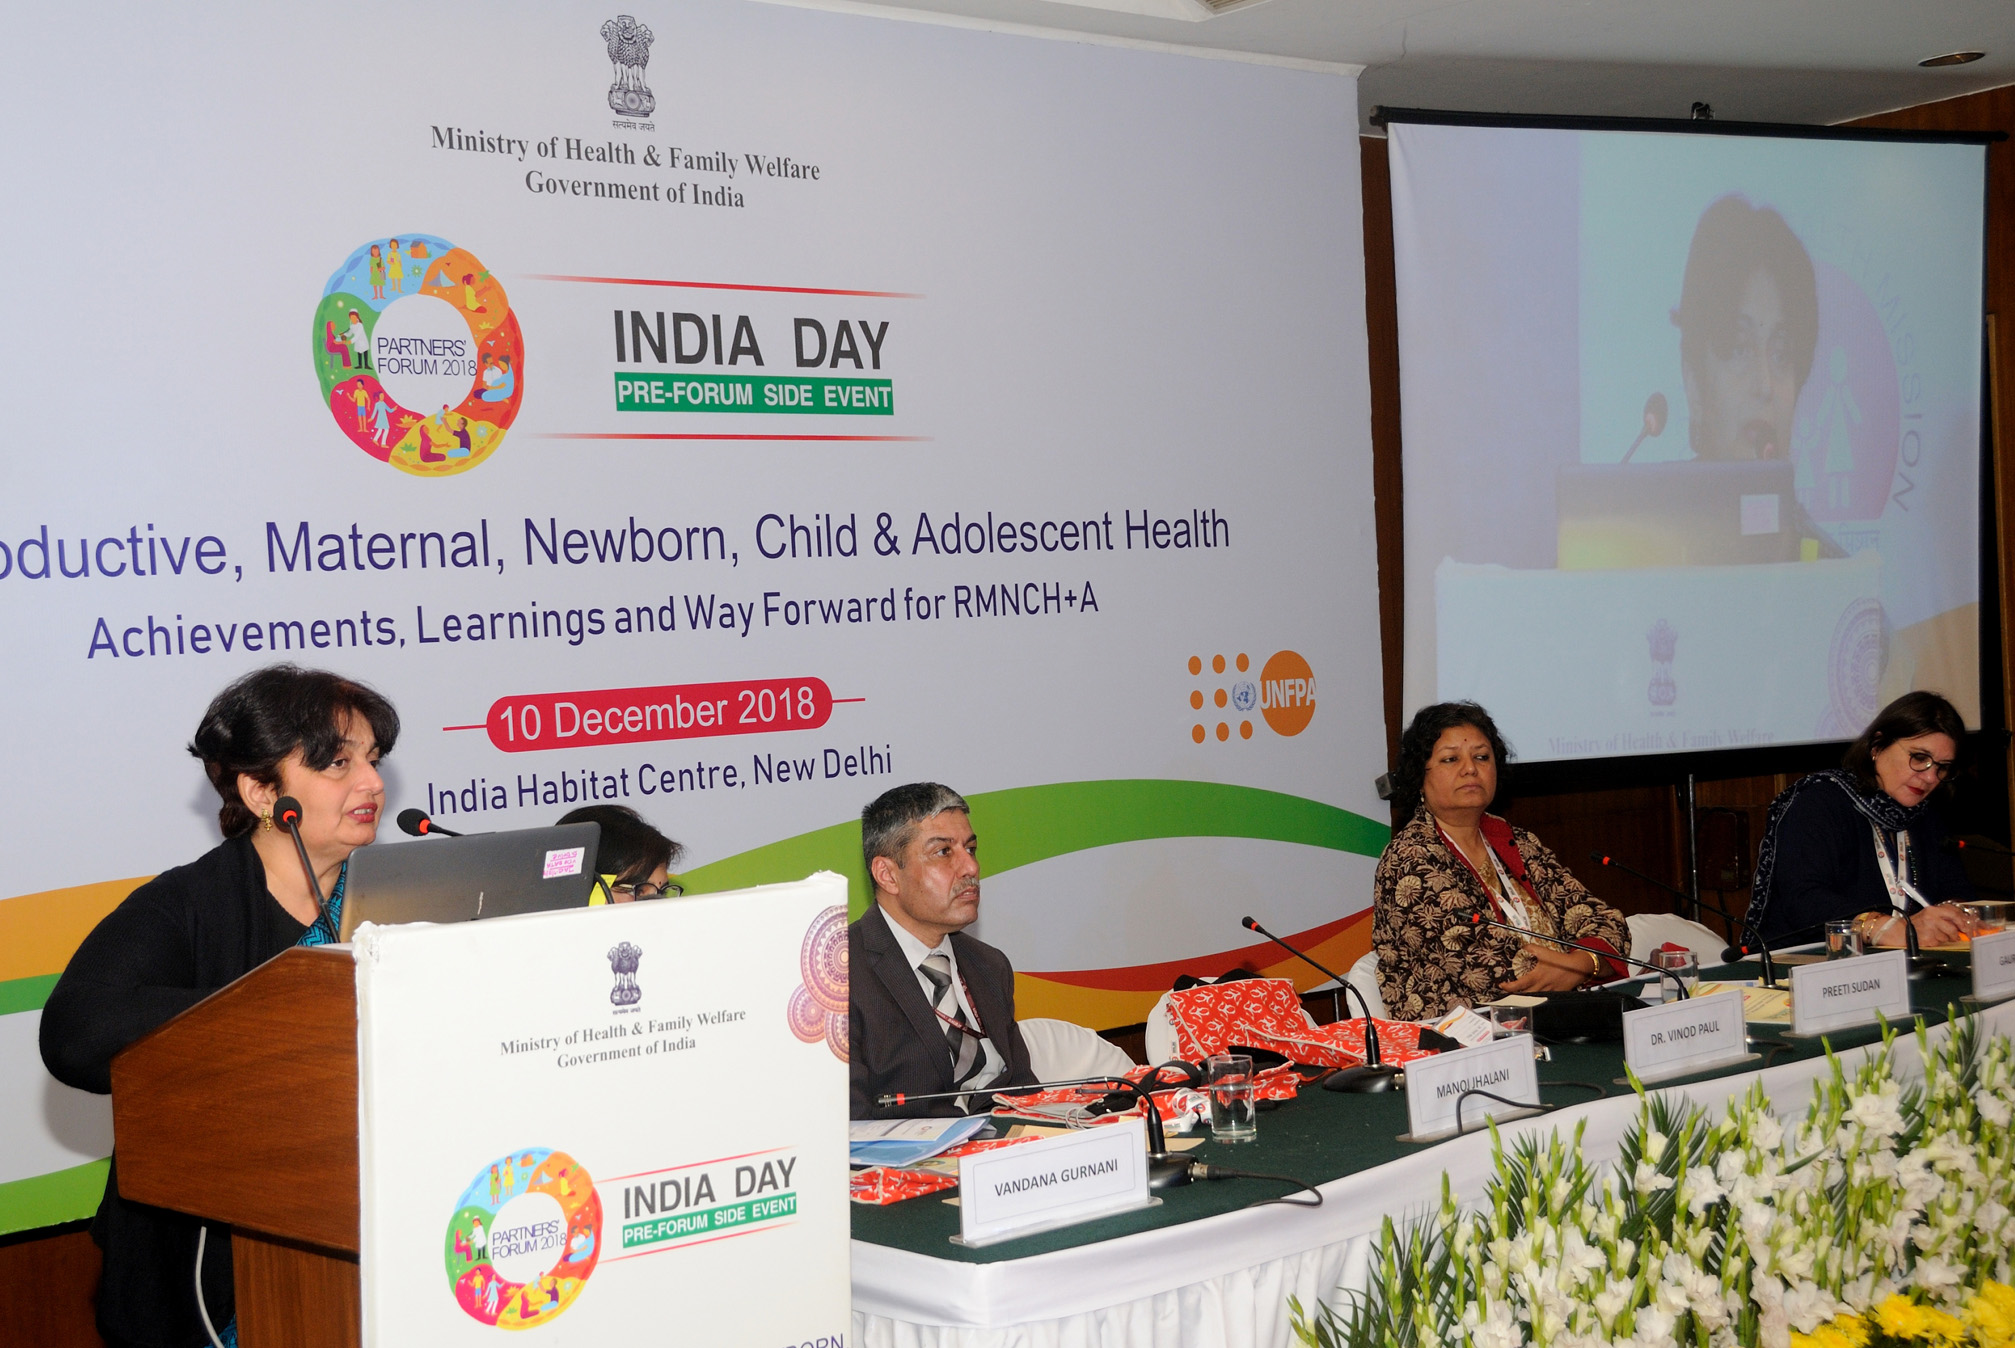 India Day: Health Ministry brings together partners and youth to share best practices from states